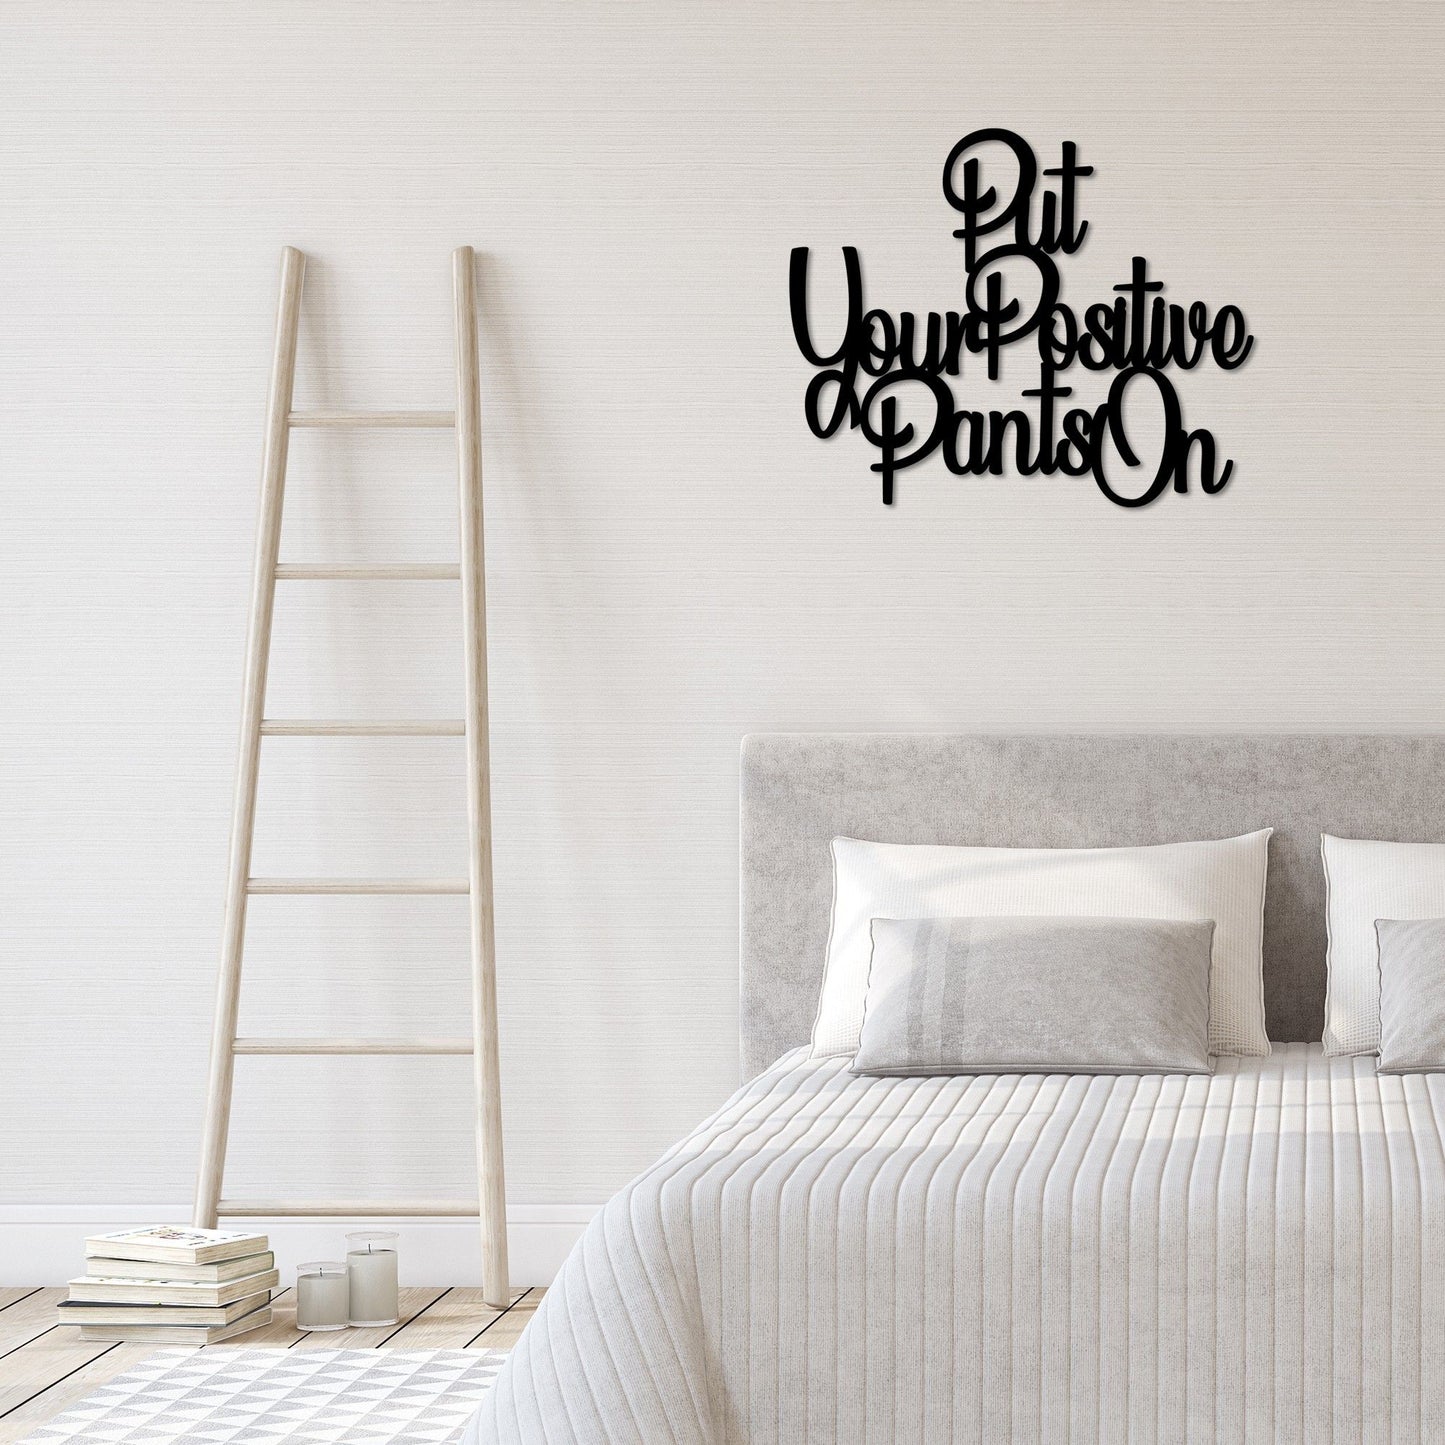 Put Your Positive Pants On - Decorative Metal Wall Accessory